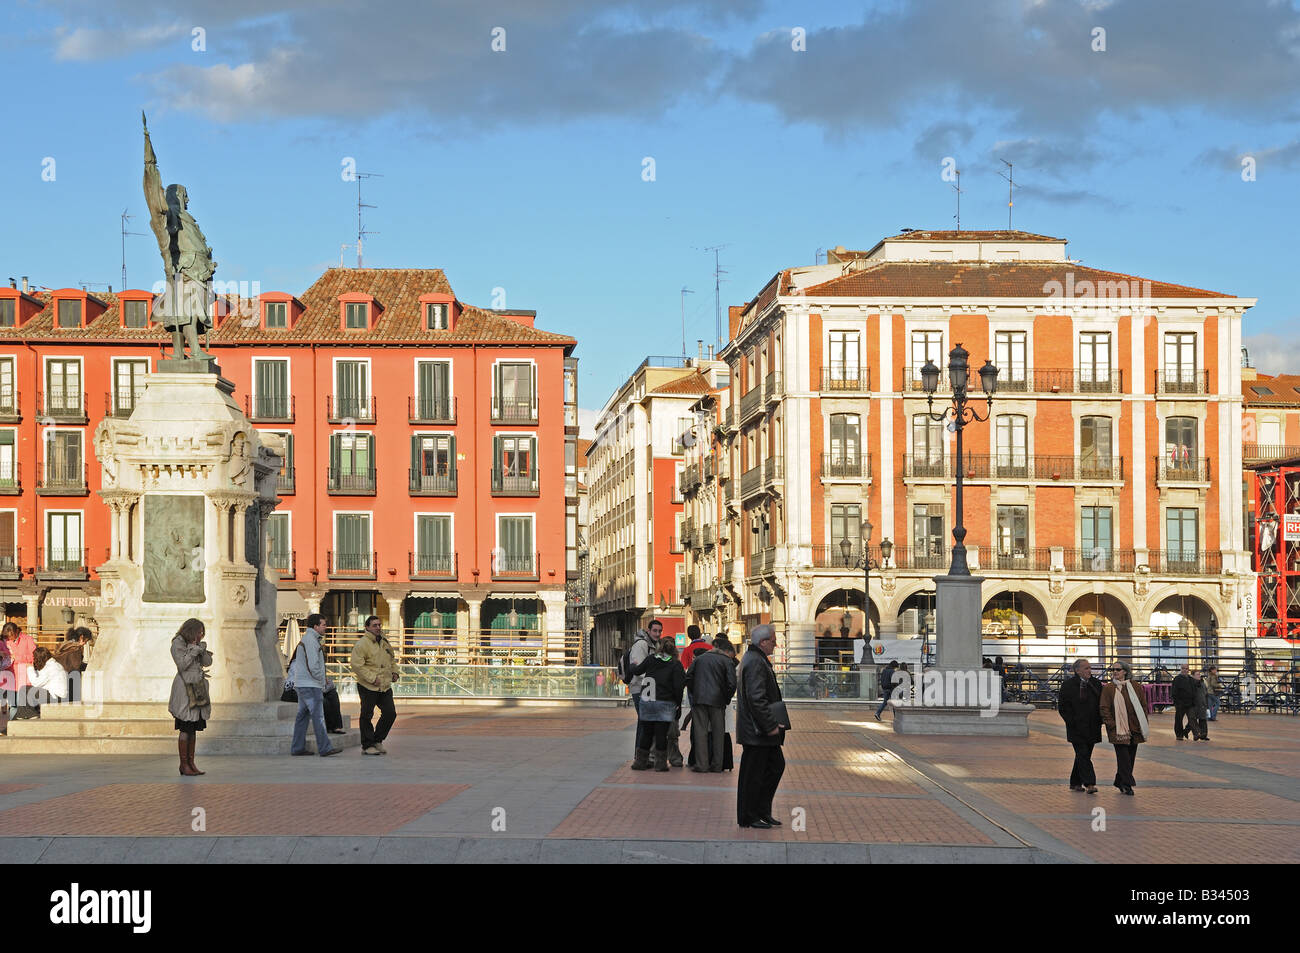 Statue of Count Ansúrez dominating the Plaza Mayor Valladolid Spain Pedestrians people enjoy the square Stock Photo